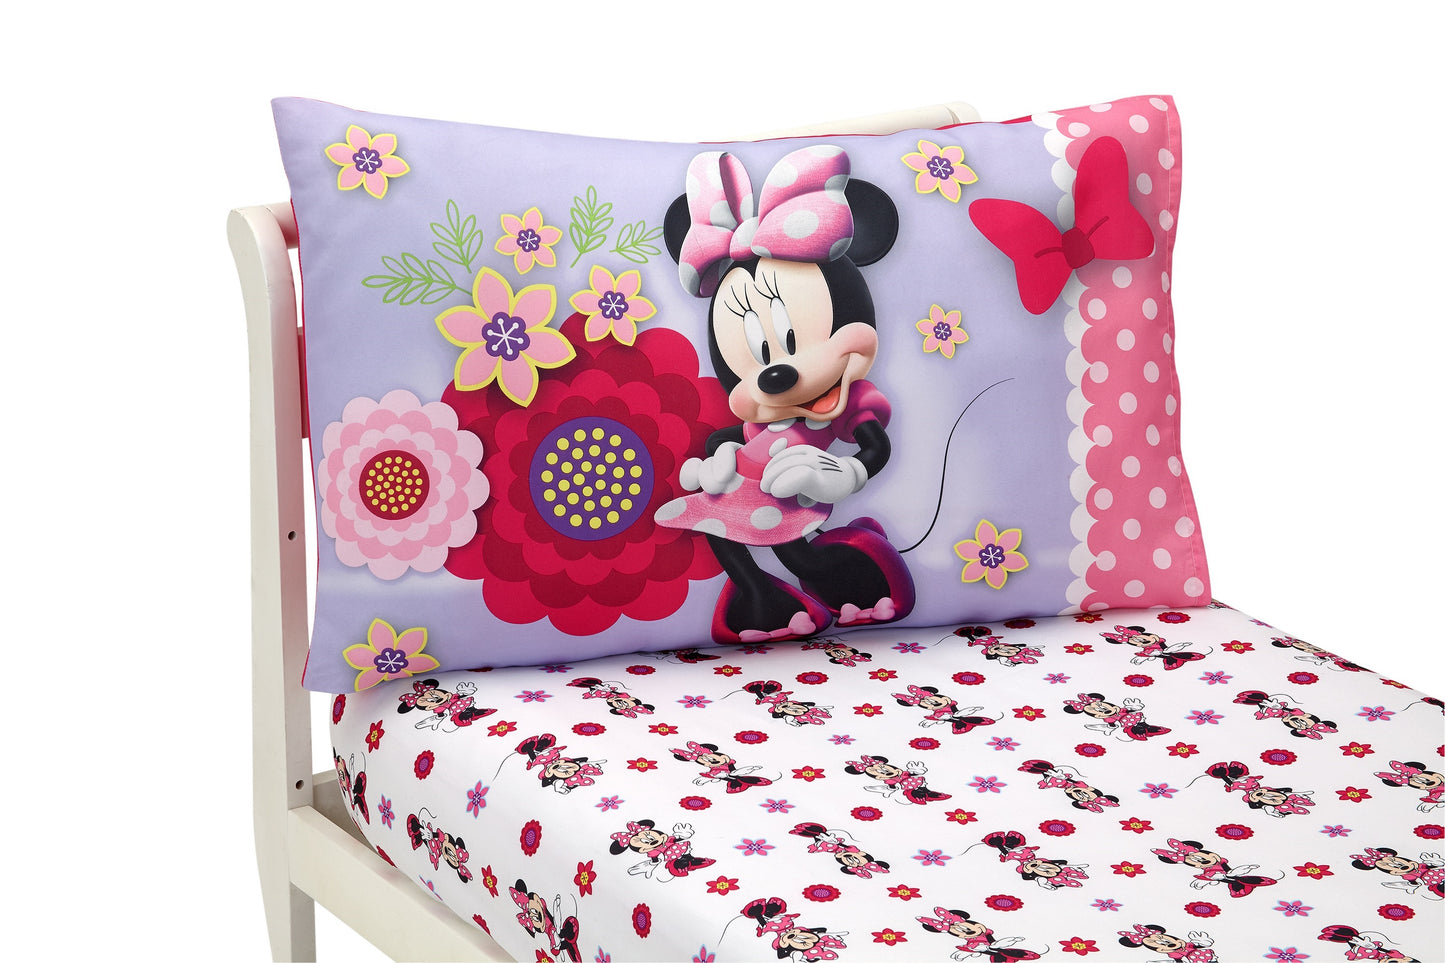 Disney Minnie Mouse Bow Power Pink, Lavender and White 2 Piece Toddler Sheet Set - Fitted Sheet and Reversible Pillowcase